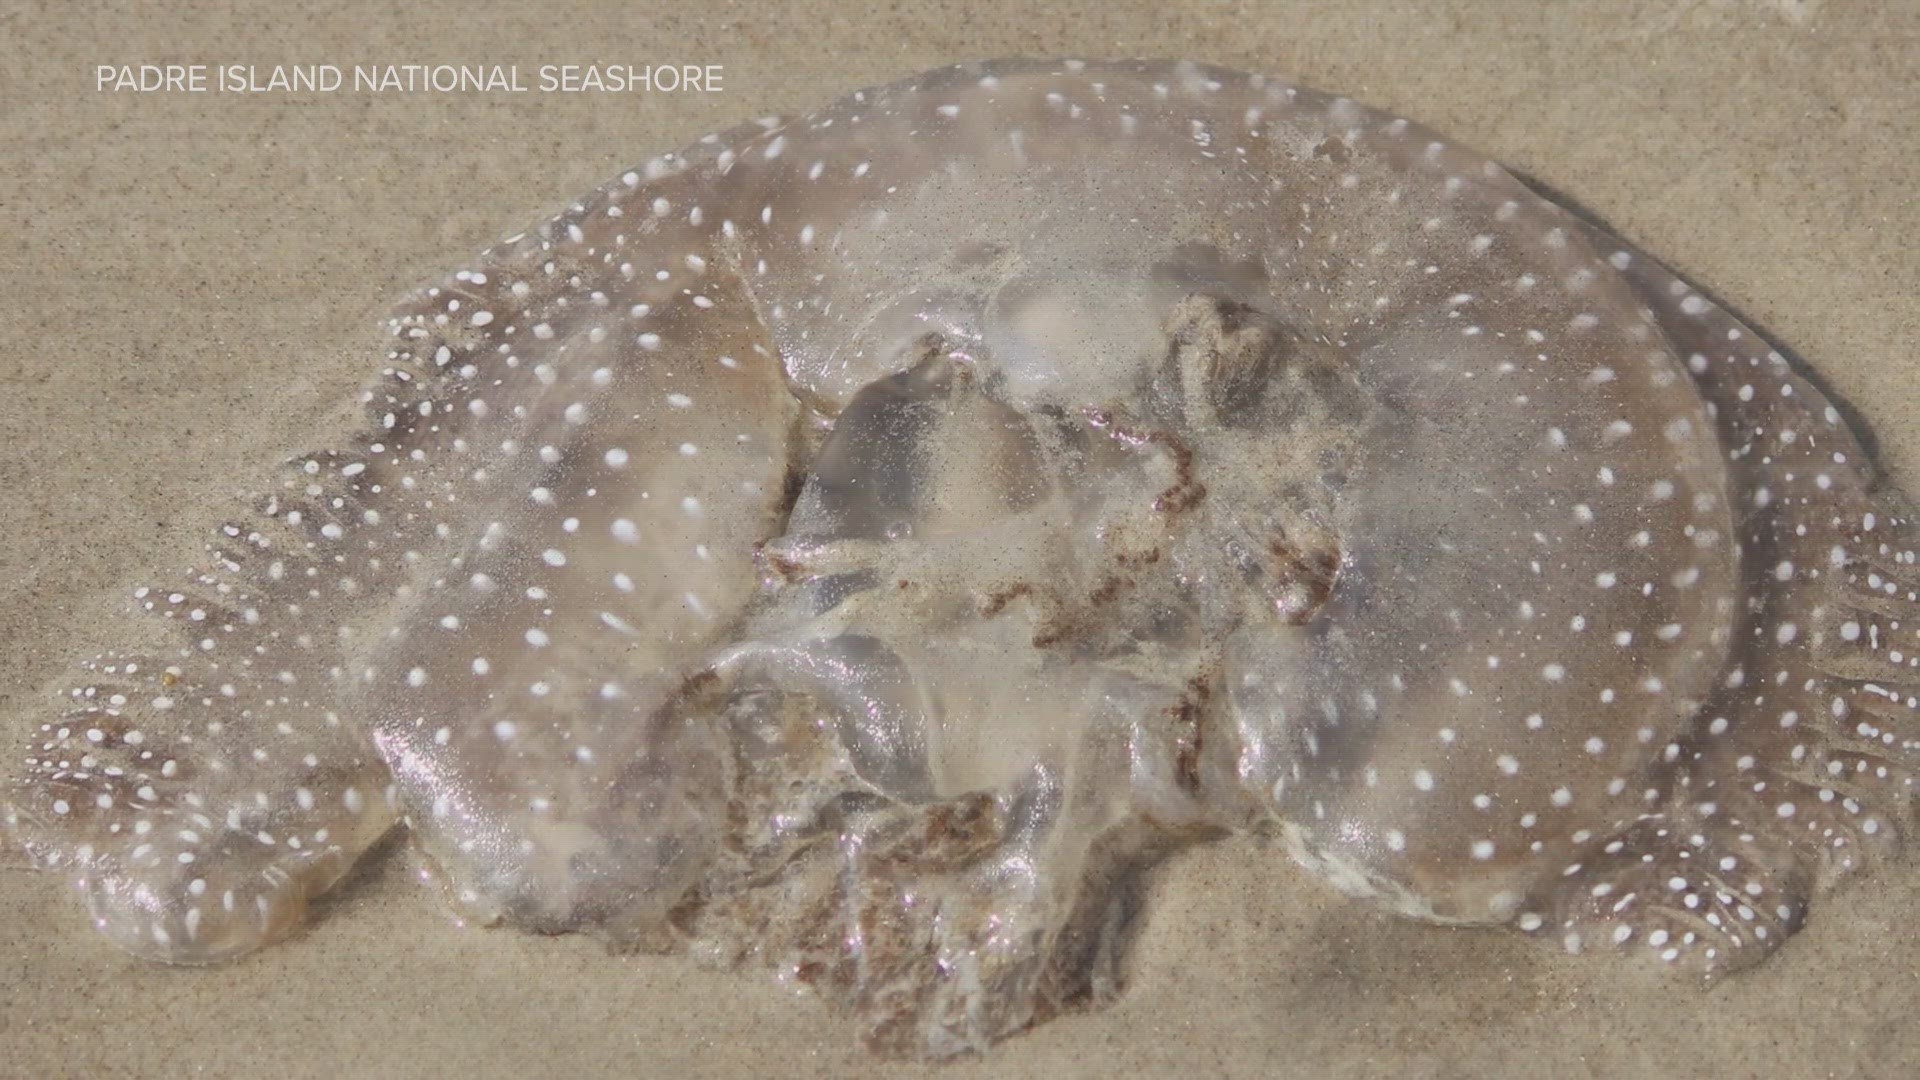 A huge jellyfish species that's native to Australia was spotted in Texas.